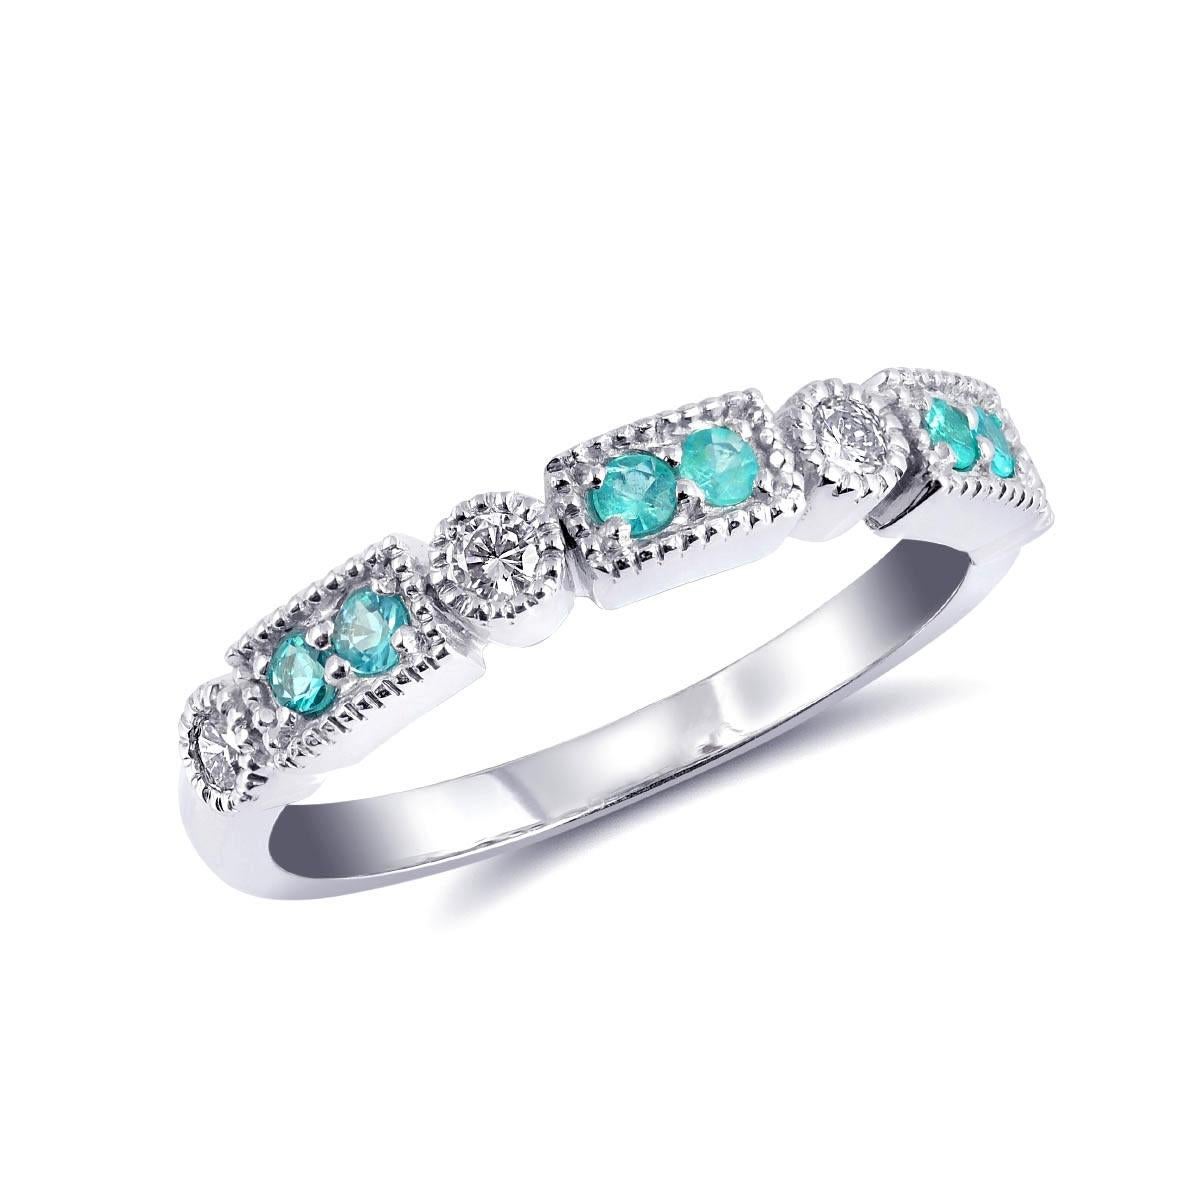 0.13 Carats Paraiba Tourmalines Diamonds set in 14K White Gold Stackable Ring In New Condition For Sale In Los Angeles, CA